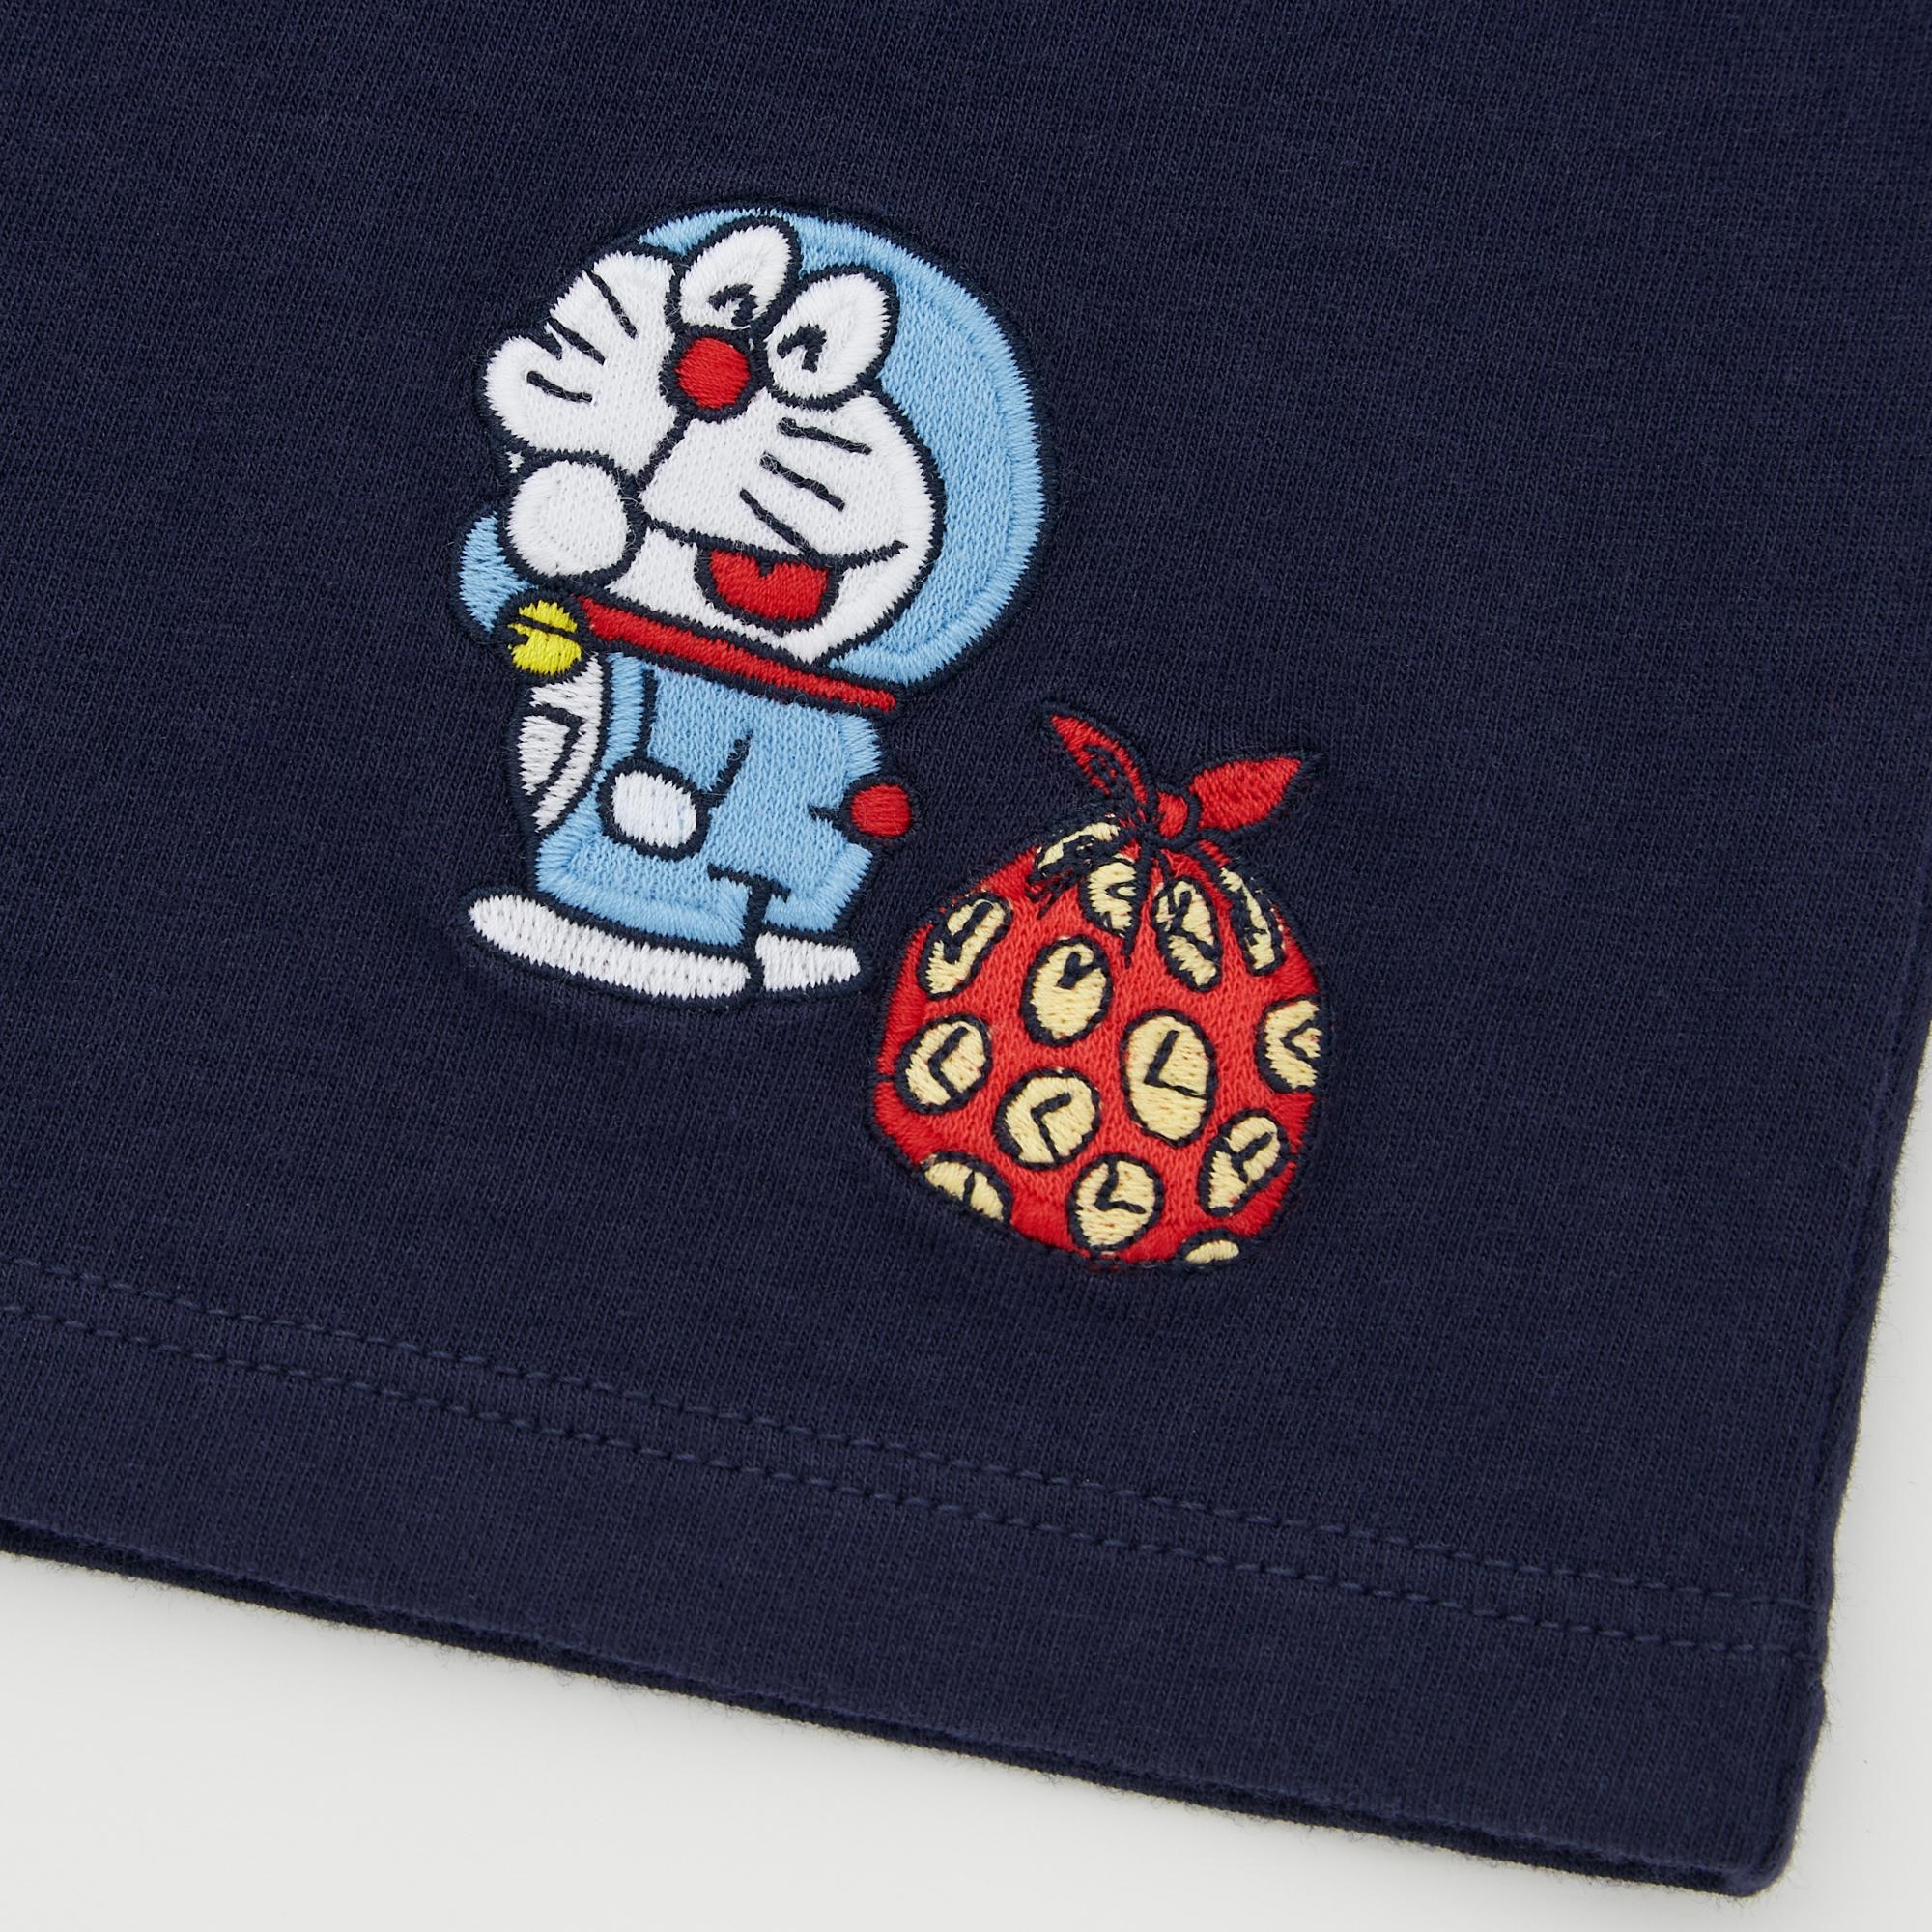 Uniqlo is Dropping a Doraemon Collection With Takashi Murakami